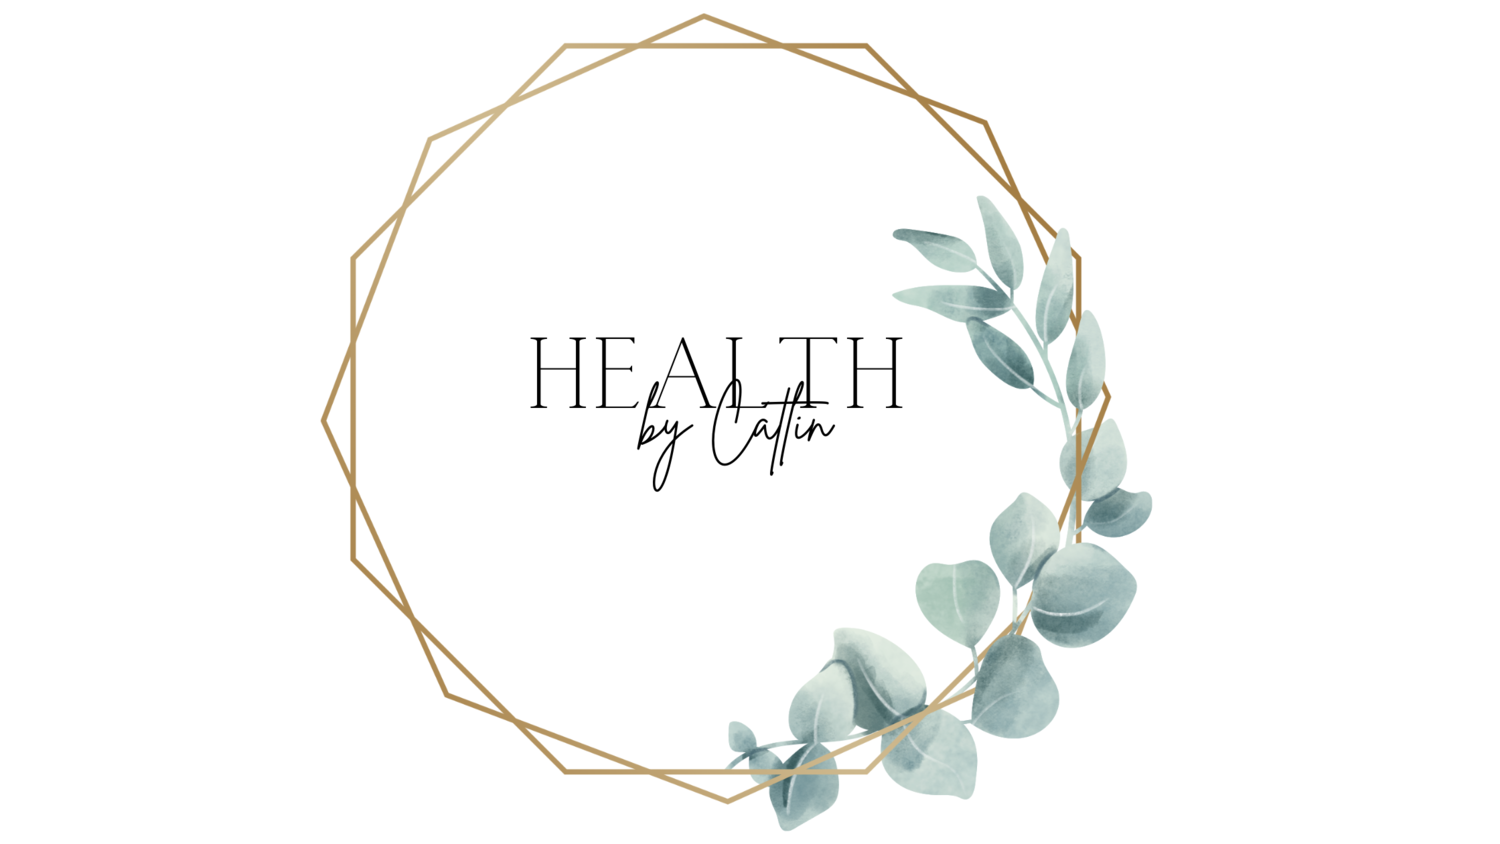 Health by Catlin